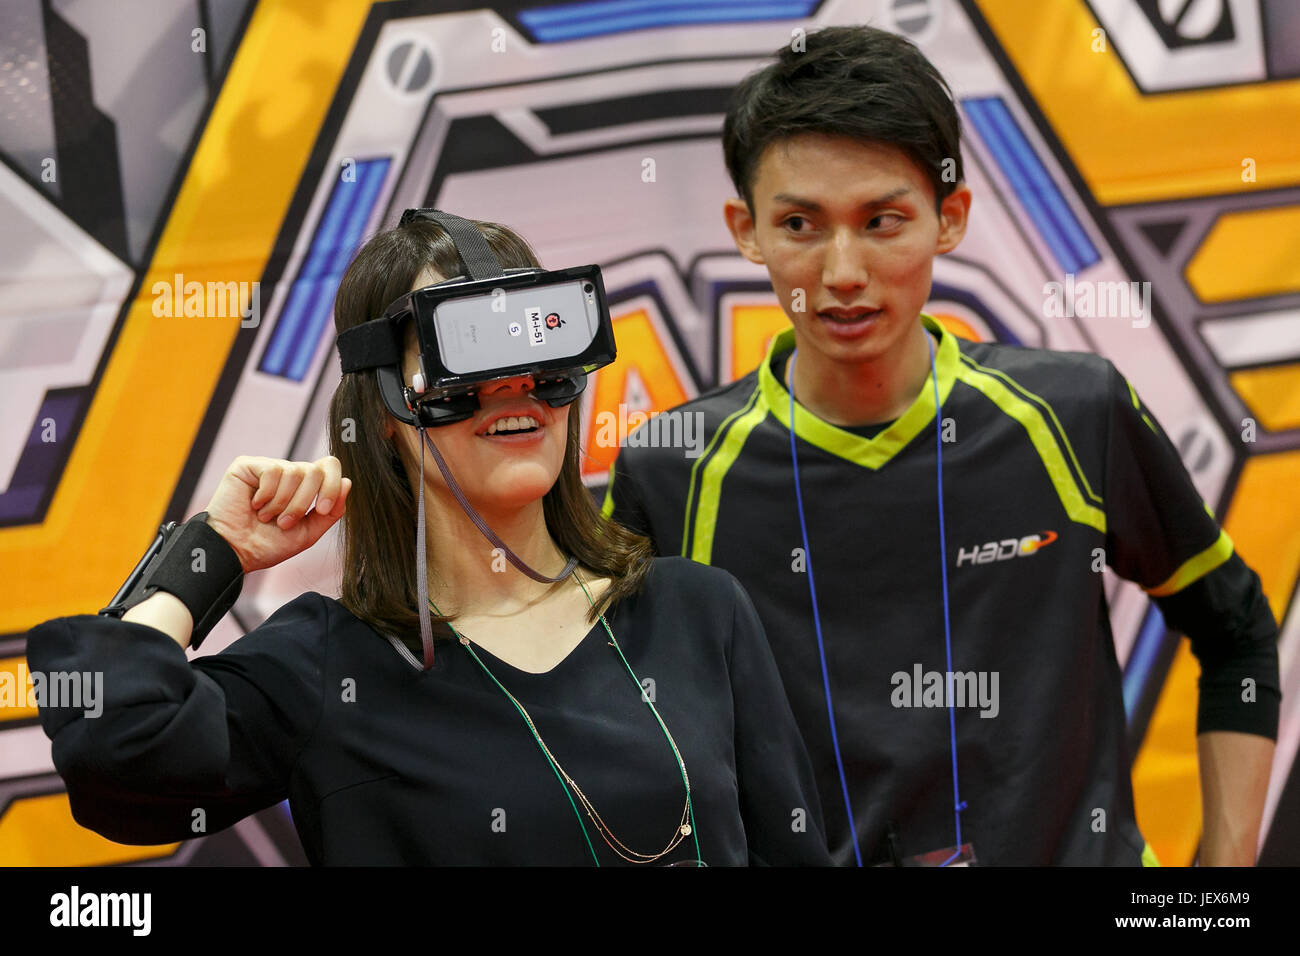 Tokyo, Japan. 28th June, 2017. A woman tests a virtual reality glasses during the CONTENT TOKYO 2017 at Tokyo Big Sight on June 28, 2017, Tokyo, Japan. New technologies such as Artificial Intelligence (AI), Virtual Reality (VR) and Augmented Reality (AR) are introduced during the three-day trade show where 1760 exhibitors from the entertainment content industry will attend. Organizers expect that the event will draw some 63,000 visitors. Credit: Rodrigo Reyes Marin/AFLO/Alamy Live News Stock Photo